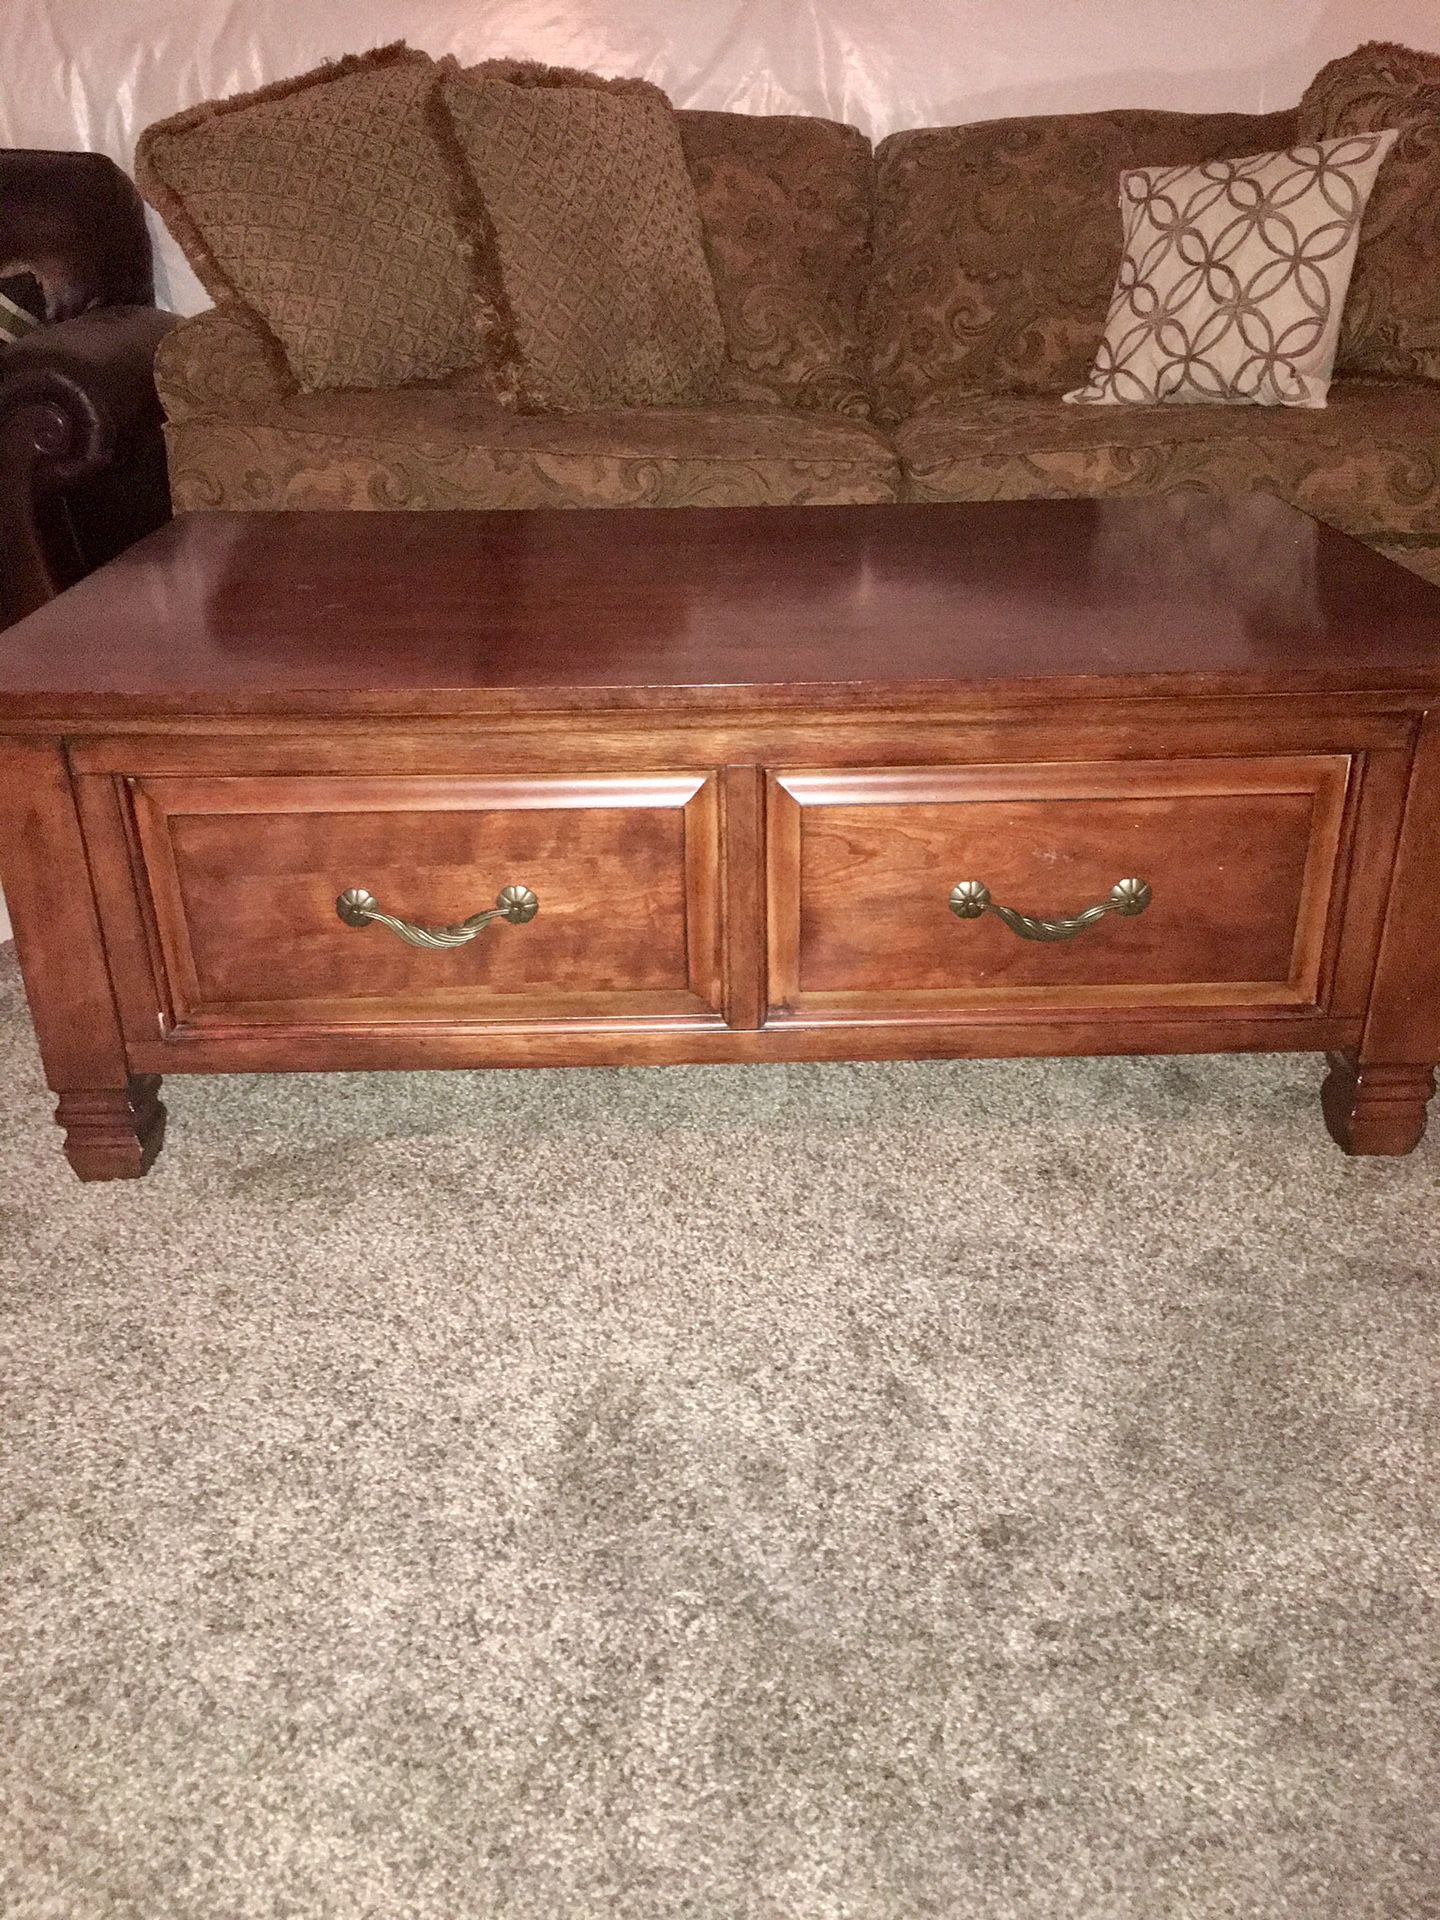 MOVING MUST SELL Solid Wood Storage Coffee Table